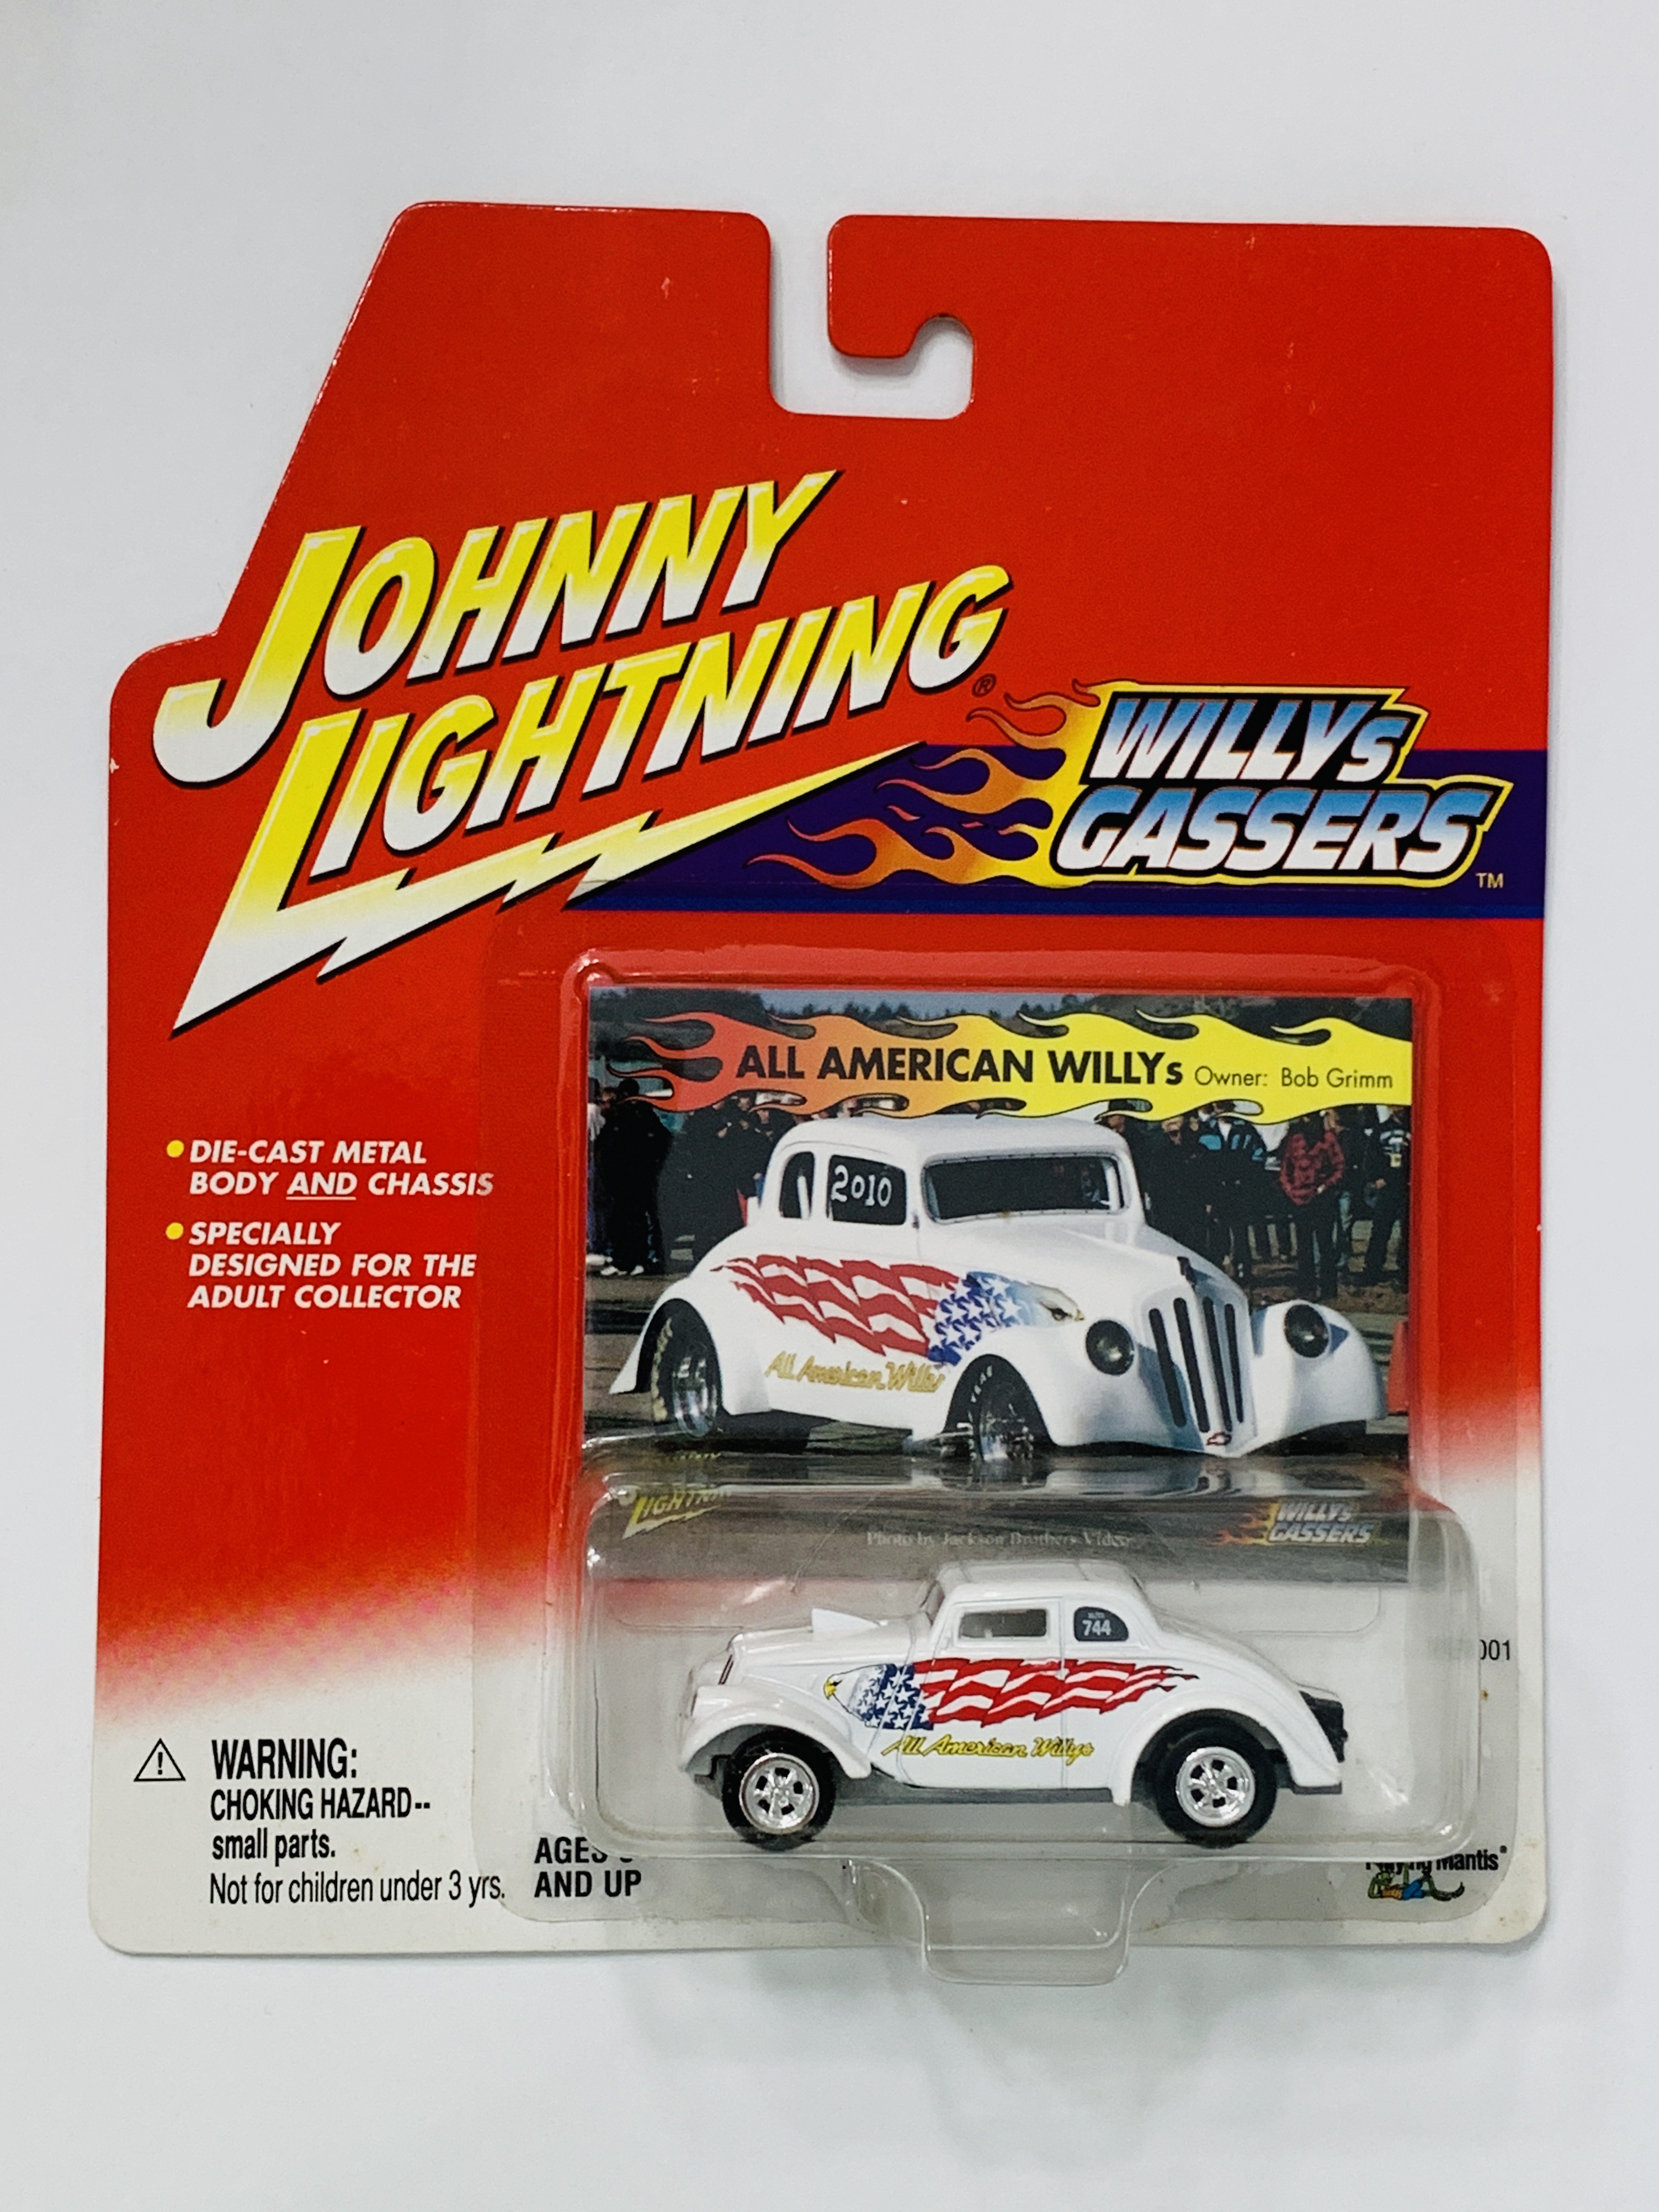 Johnny Lightning Willys Gassers All American Willys